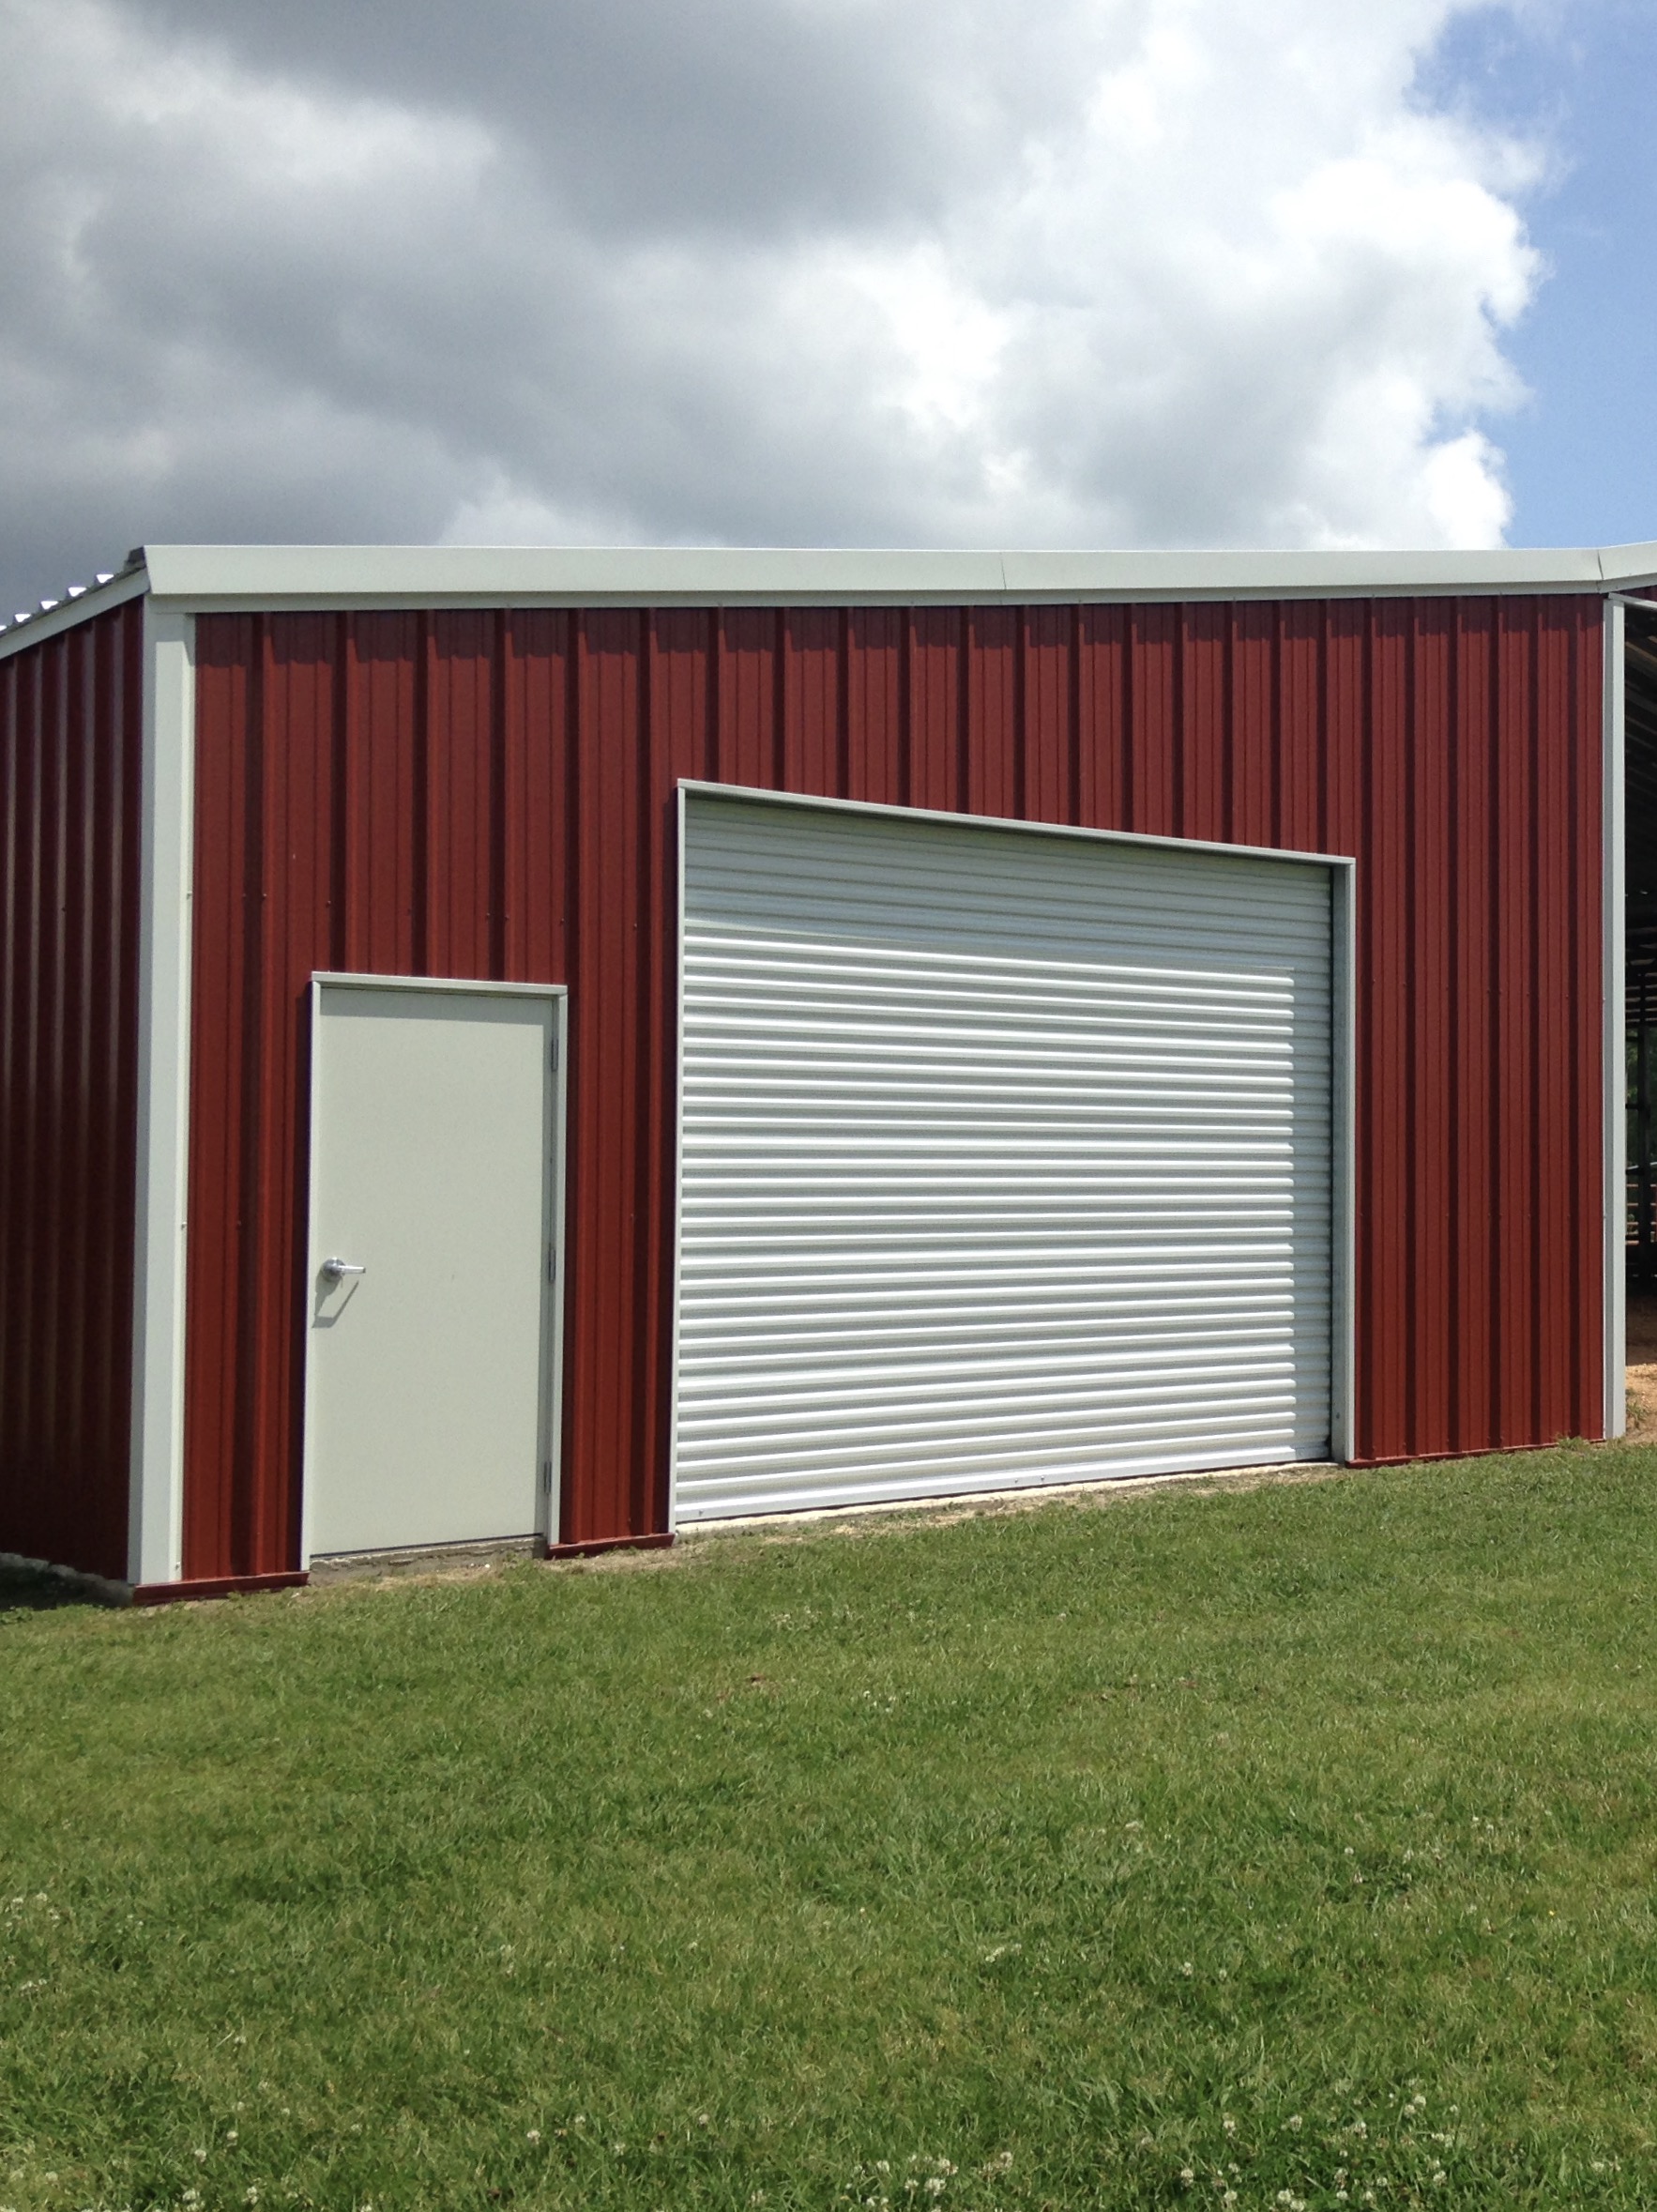 The Pipe Shop Inc Kentwood La 70444 Products Metal Buildings